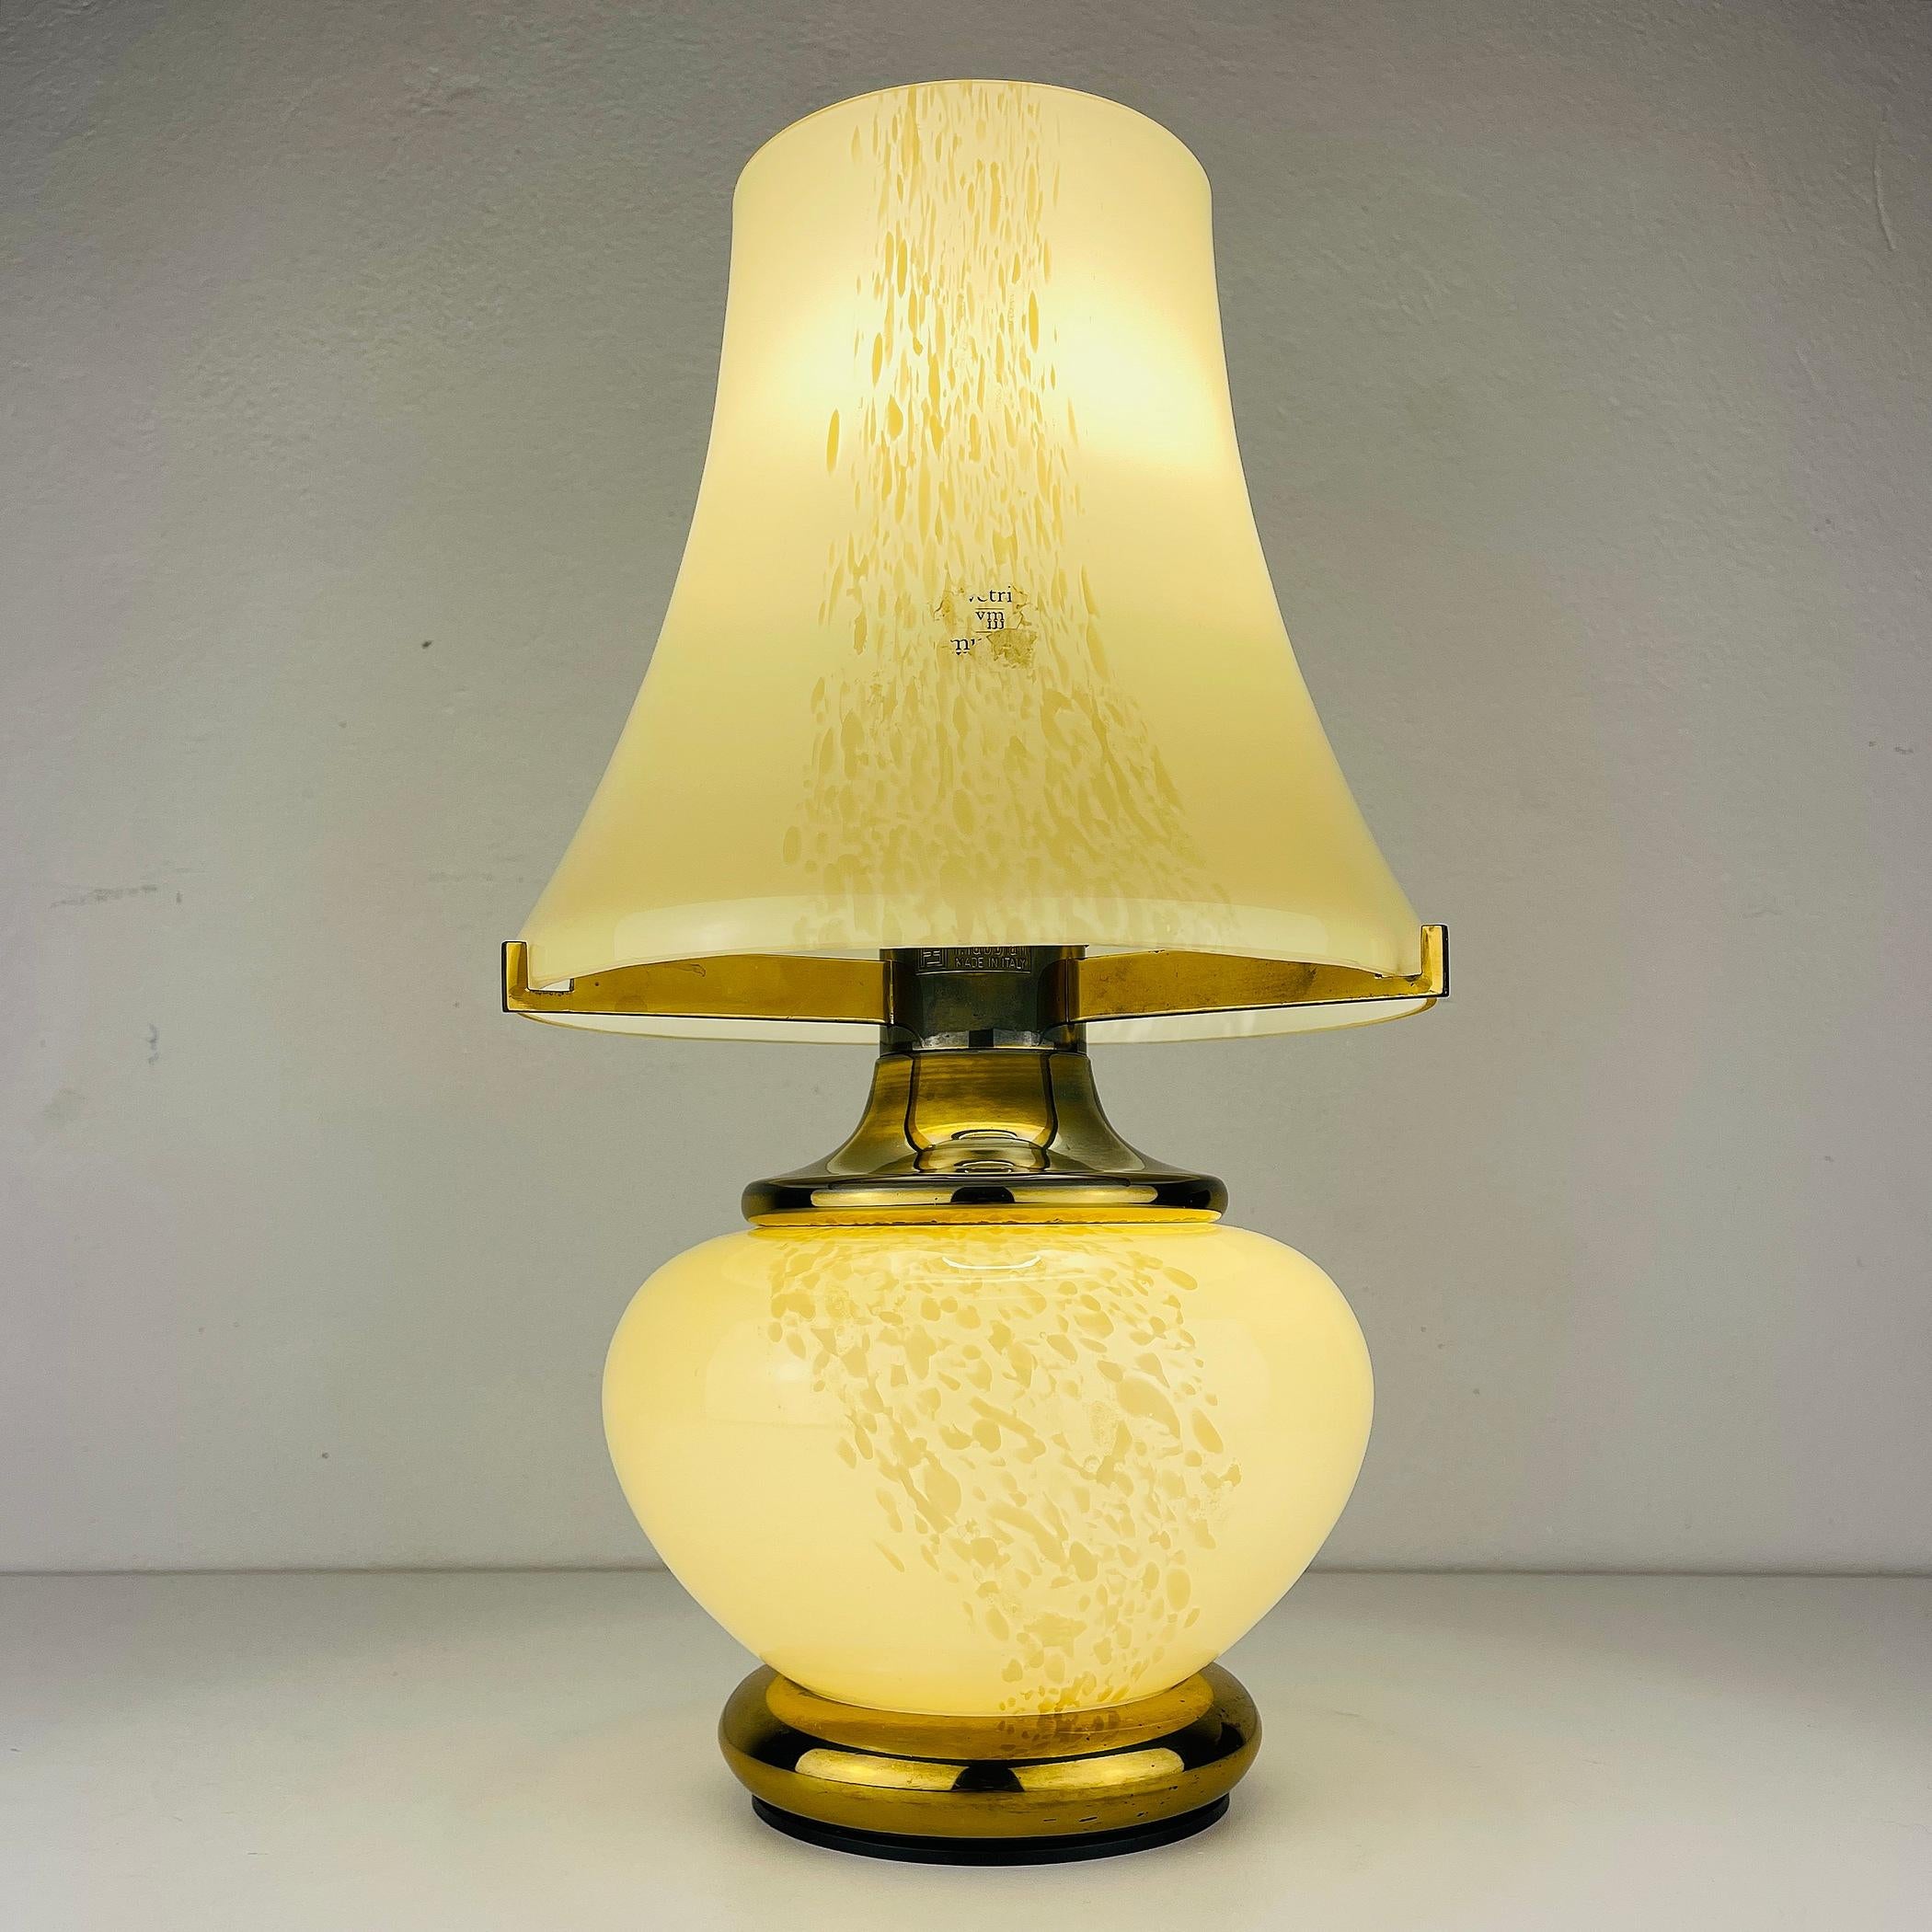 Murano glass table lamp Mushroom by F.Fabbian made in Italy in the 1970s. F.Fabbian was established in 1961 as a company manufacturing lighting appliances for residential and commercial purposes. Since May 2018, Fabbian has changed owners: it was